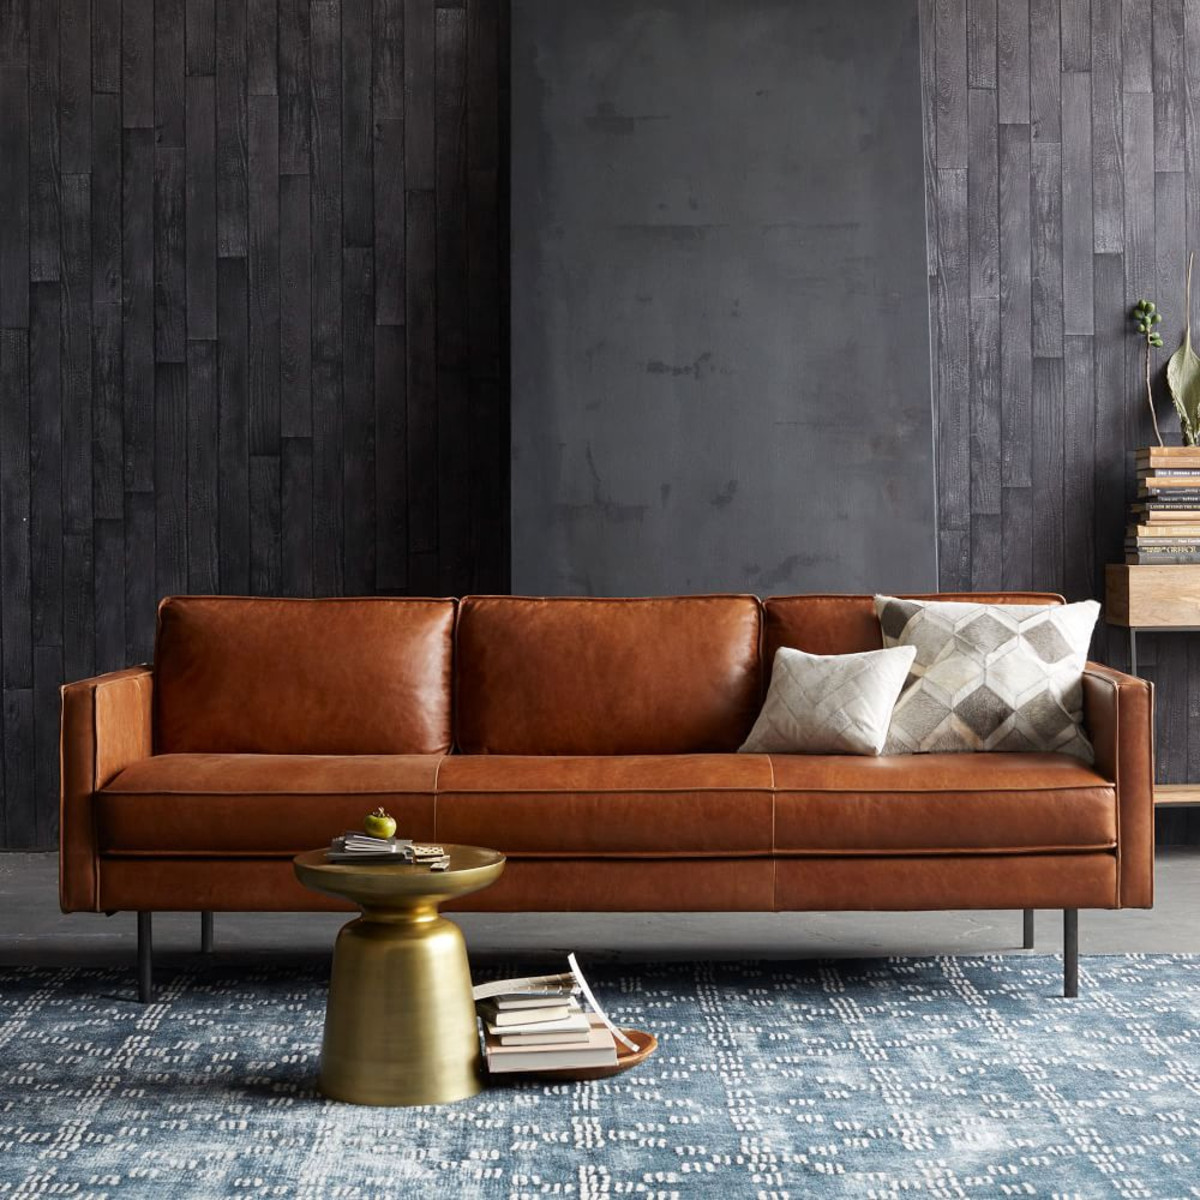 6 Of The Best Tan Leather Sofas On, Tan Leather Couches